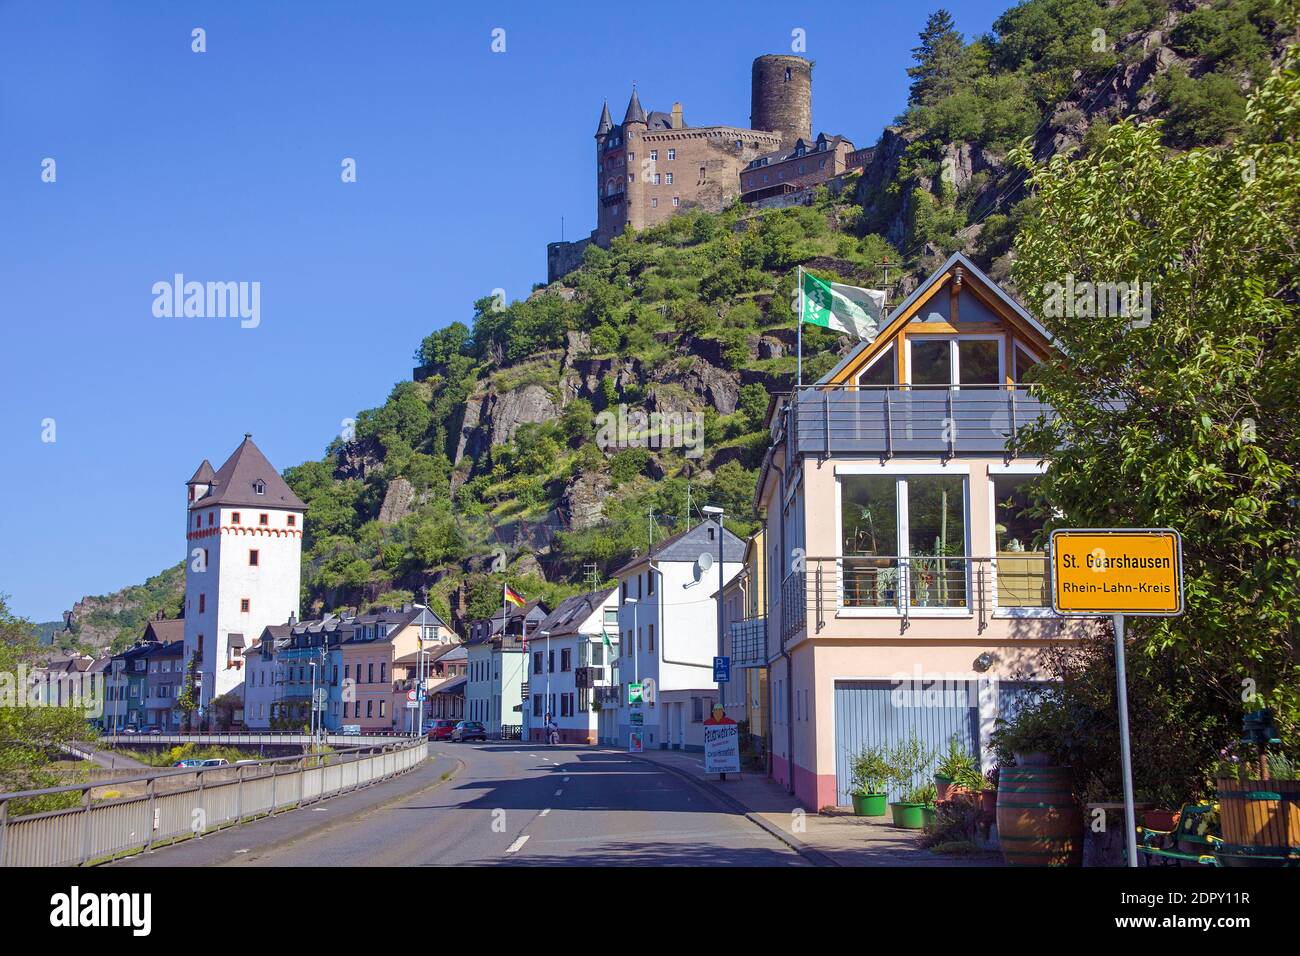 St. Goarshausen with foursquare tower and Katz castle (Burg Katz), Unesco world heritage site, Upper Middle Rhine Valley, Germany Stock Photo